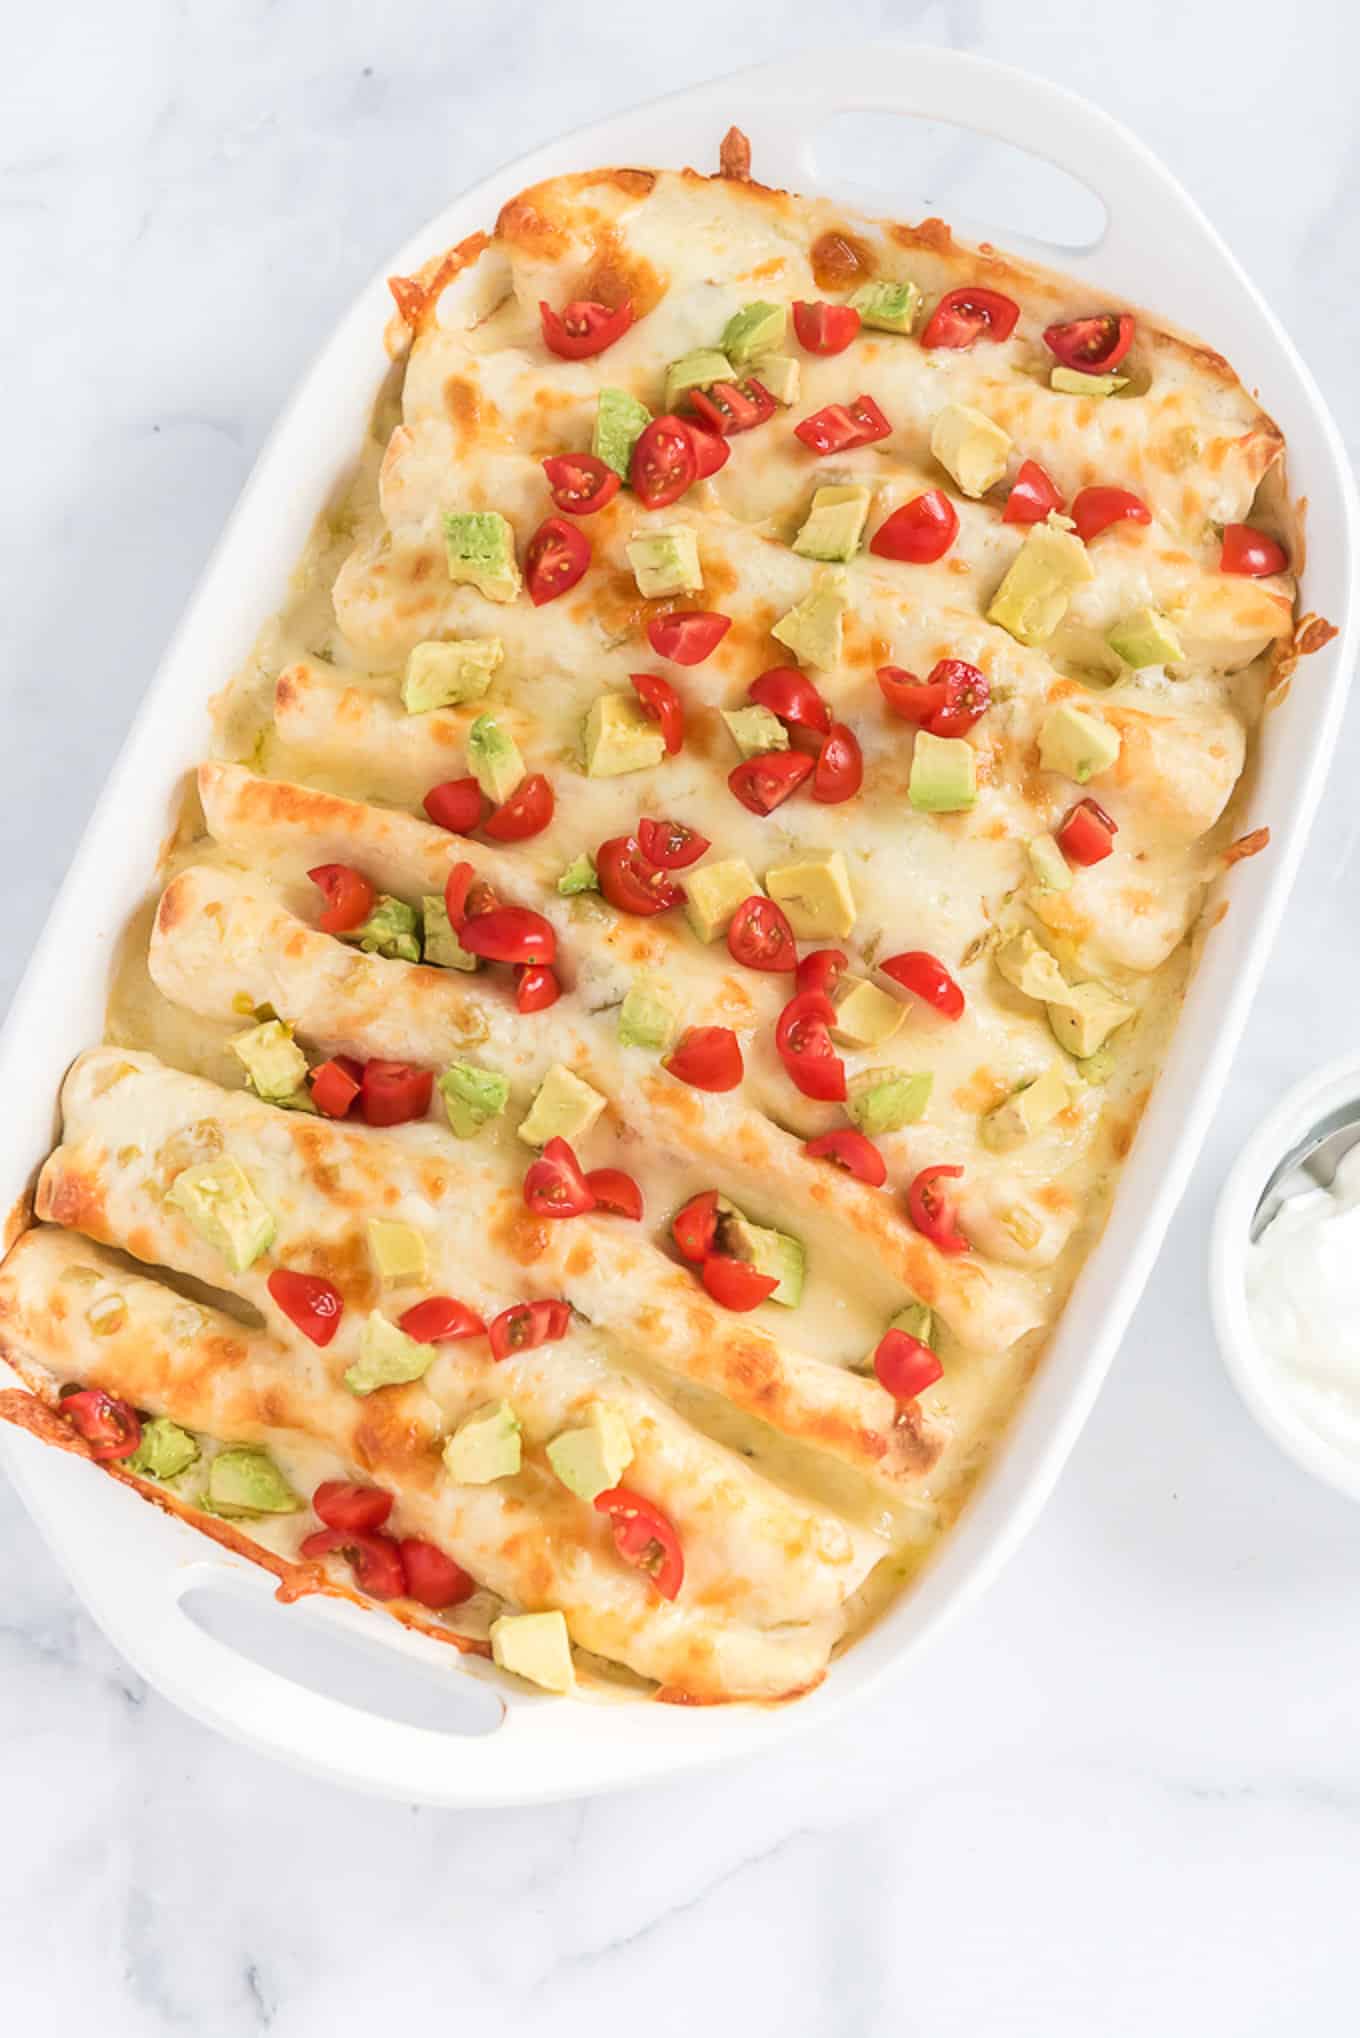 Creamy chicken enchiladas in a baking dish topped with tomatoes and diced avocado.